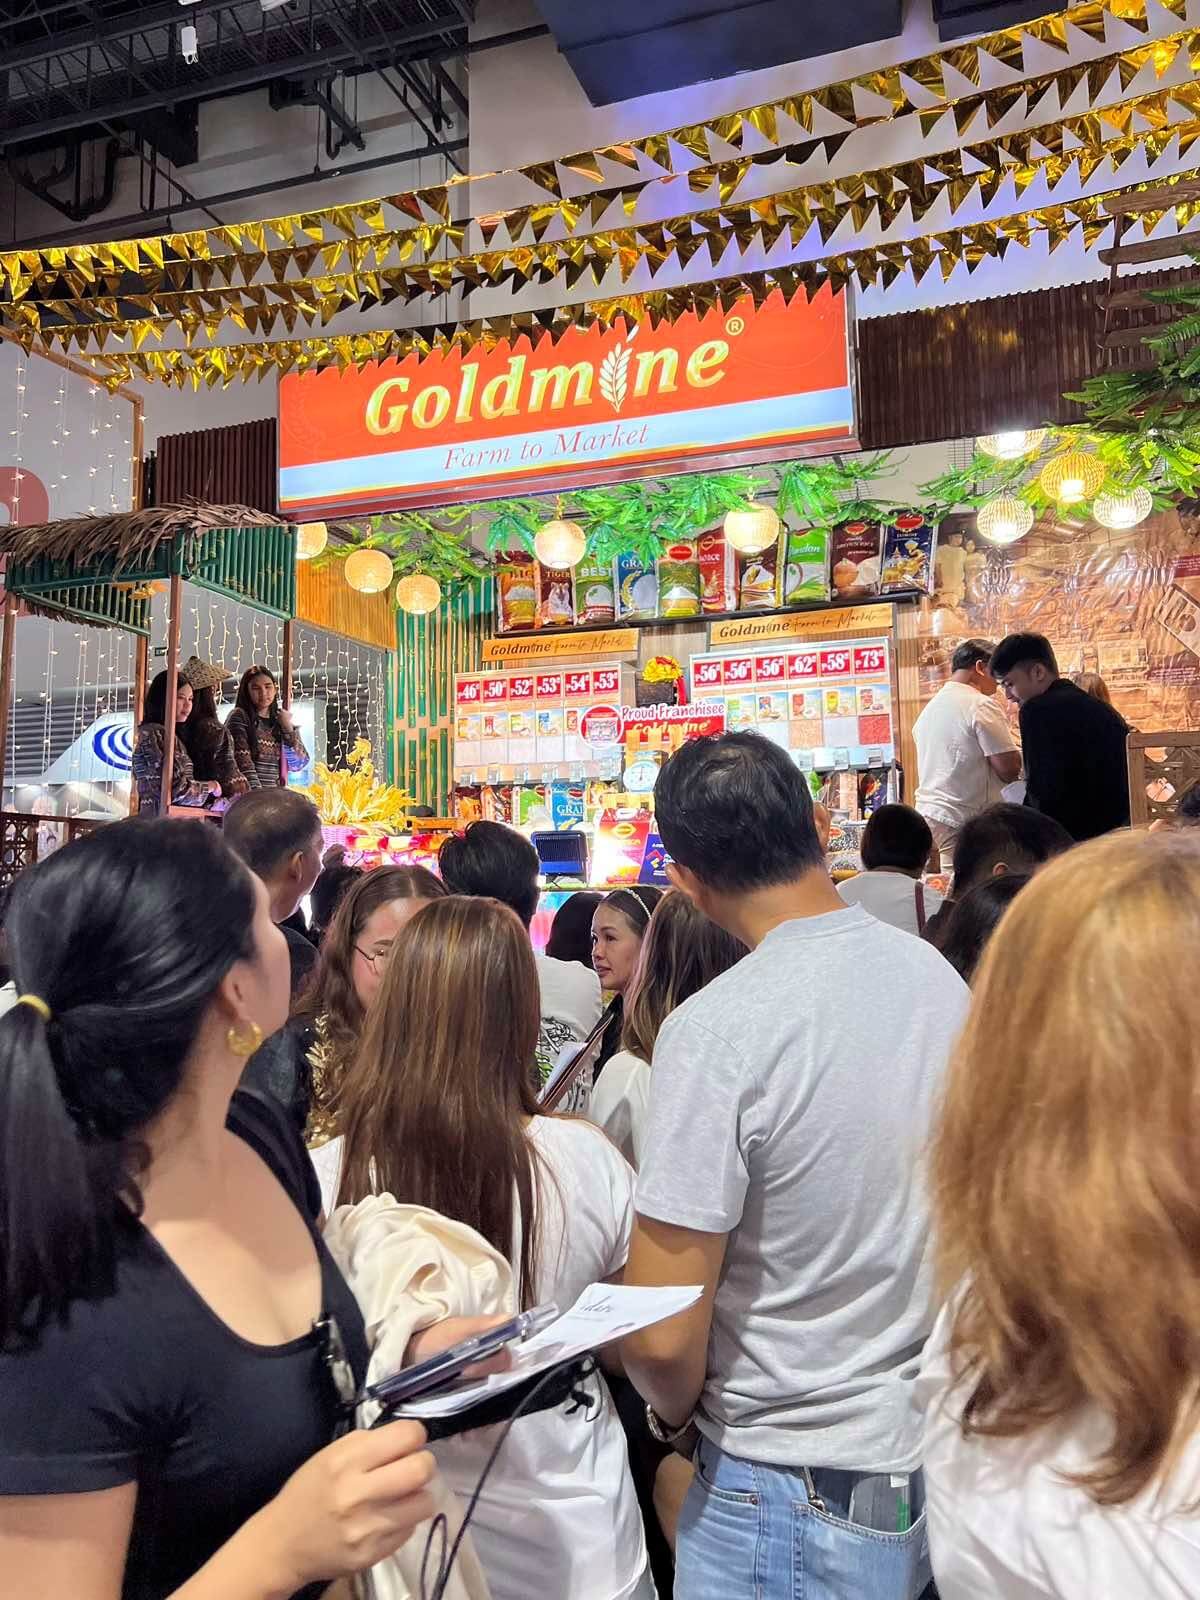 Goldmine Farm to Market: The first-ever Agri-business franchise in the Philippines to adopt a comprehensive “Farm to Market” Approach